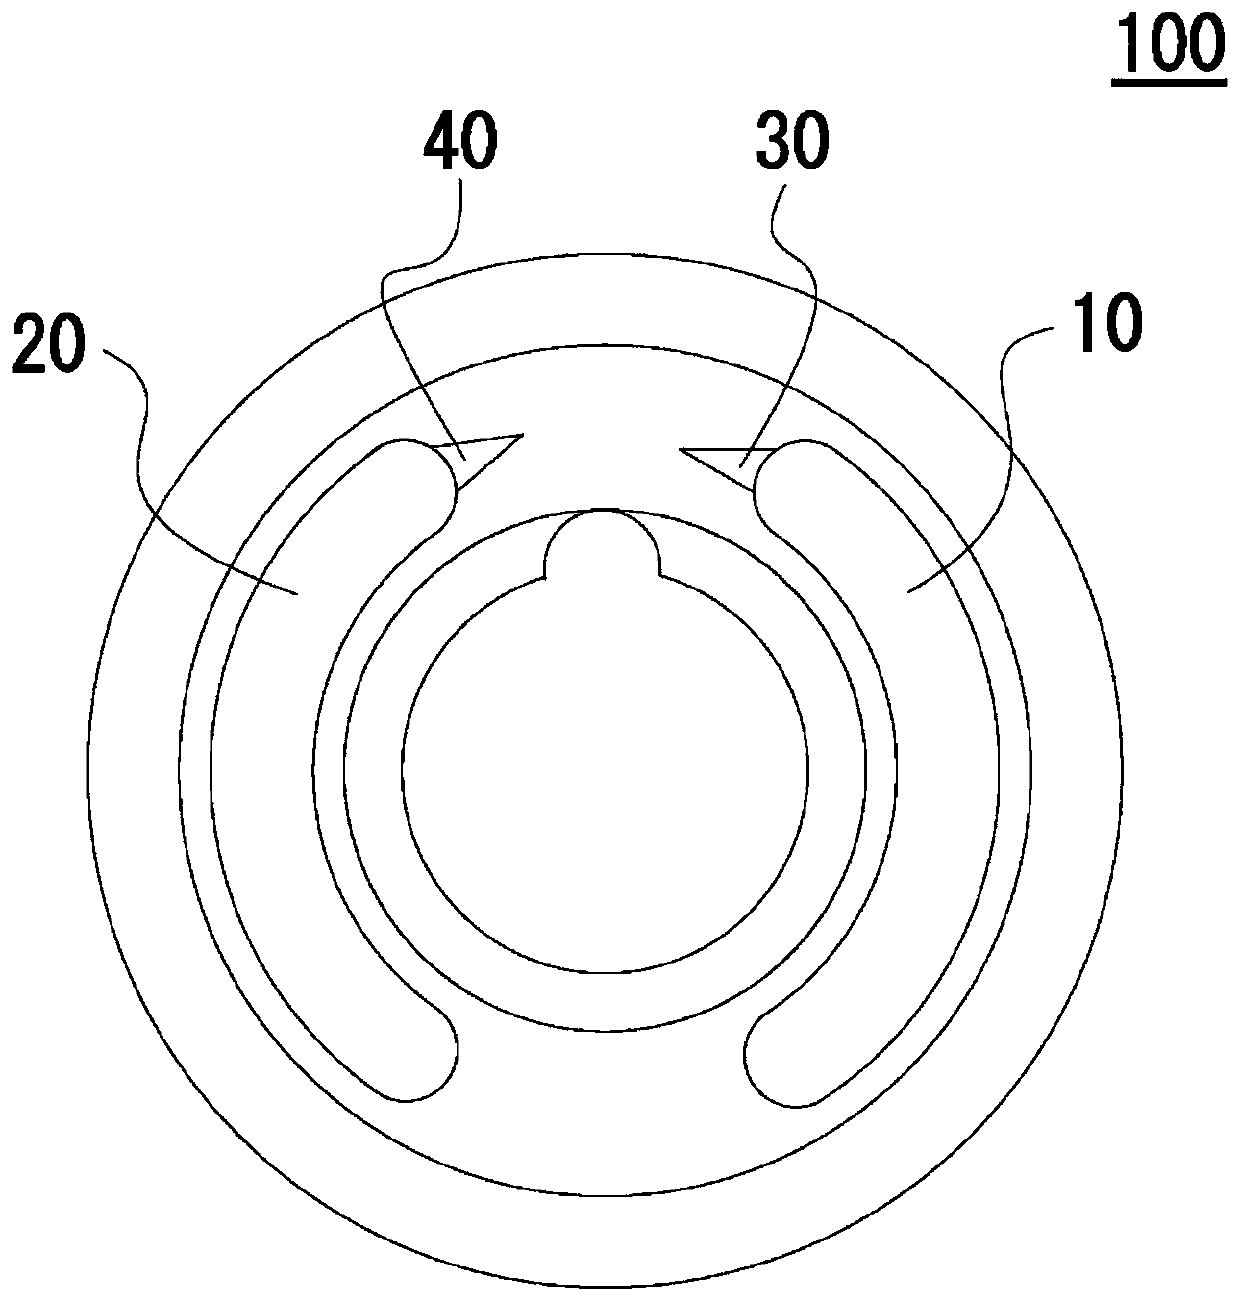 Valve plate and hydraulic rotating device